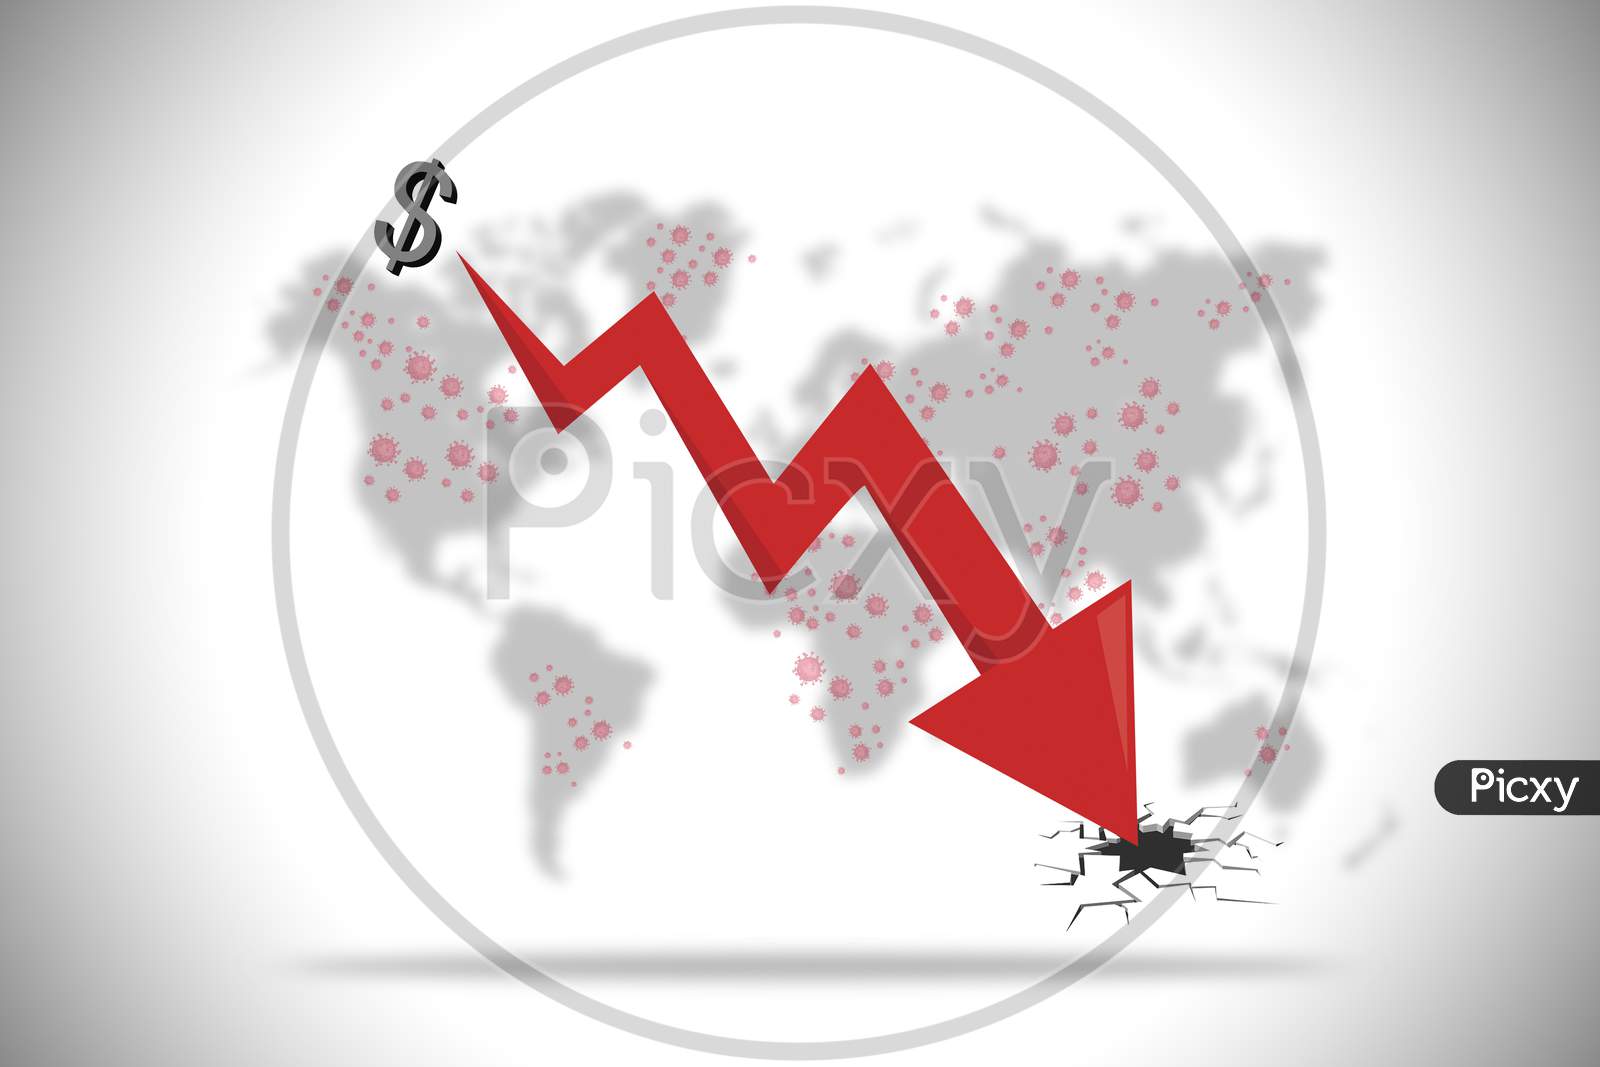 Illustration On Fall Of World Economy Or Economy Crisis Due To Corona Virus And Covid-19 In The World